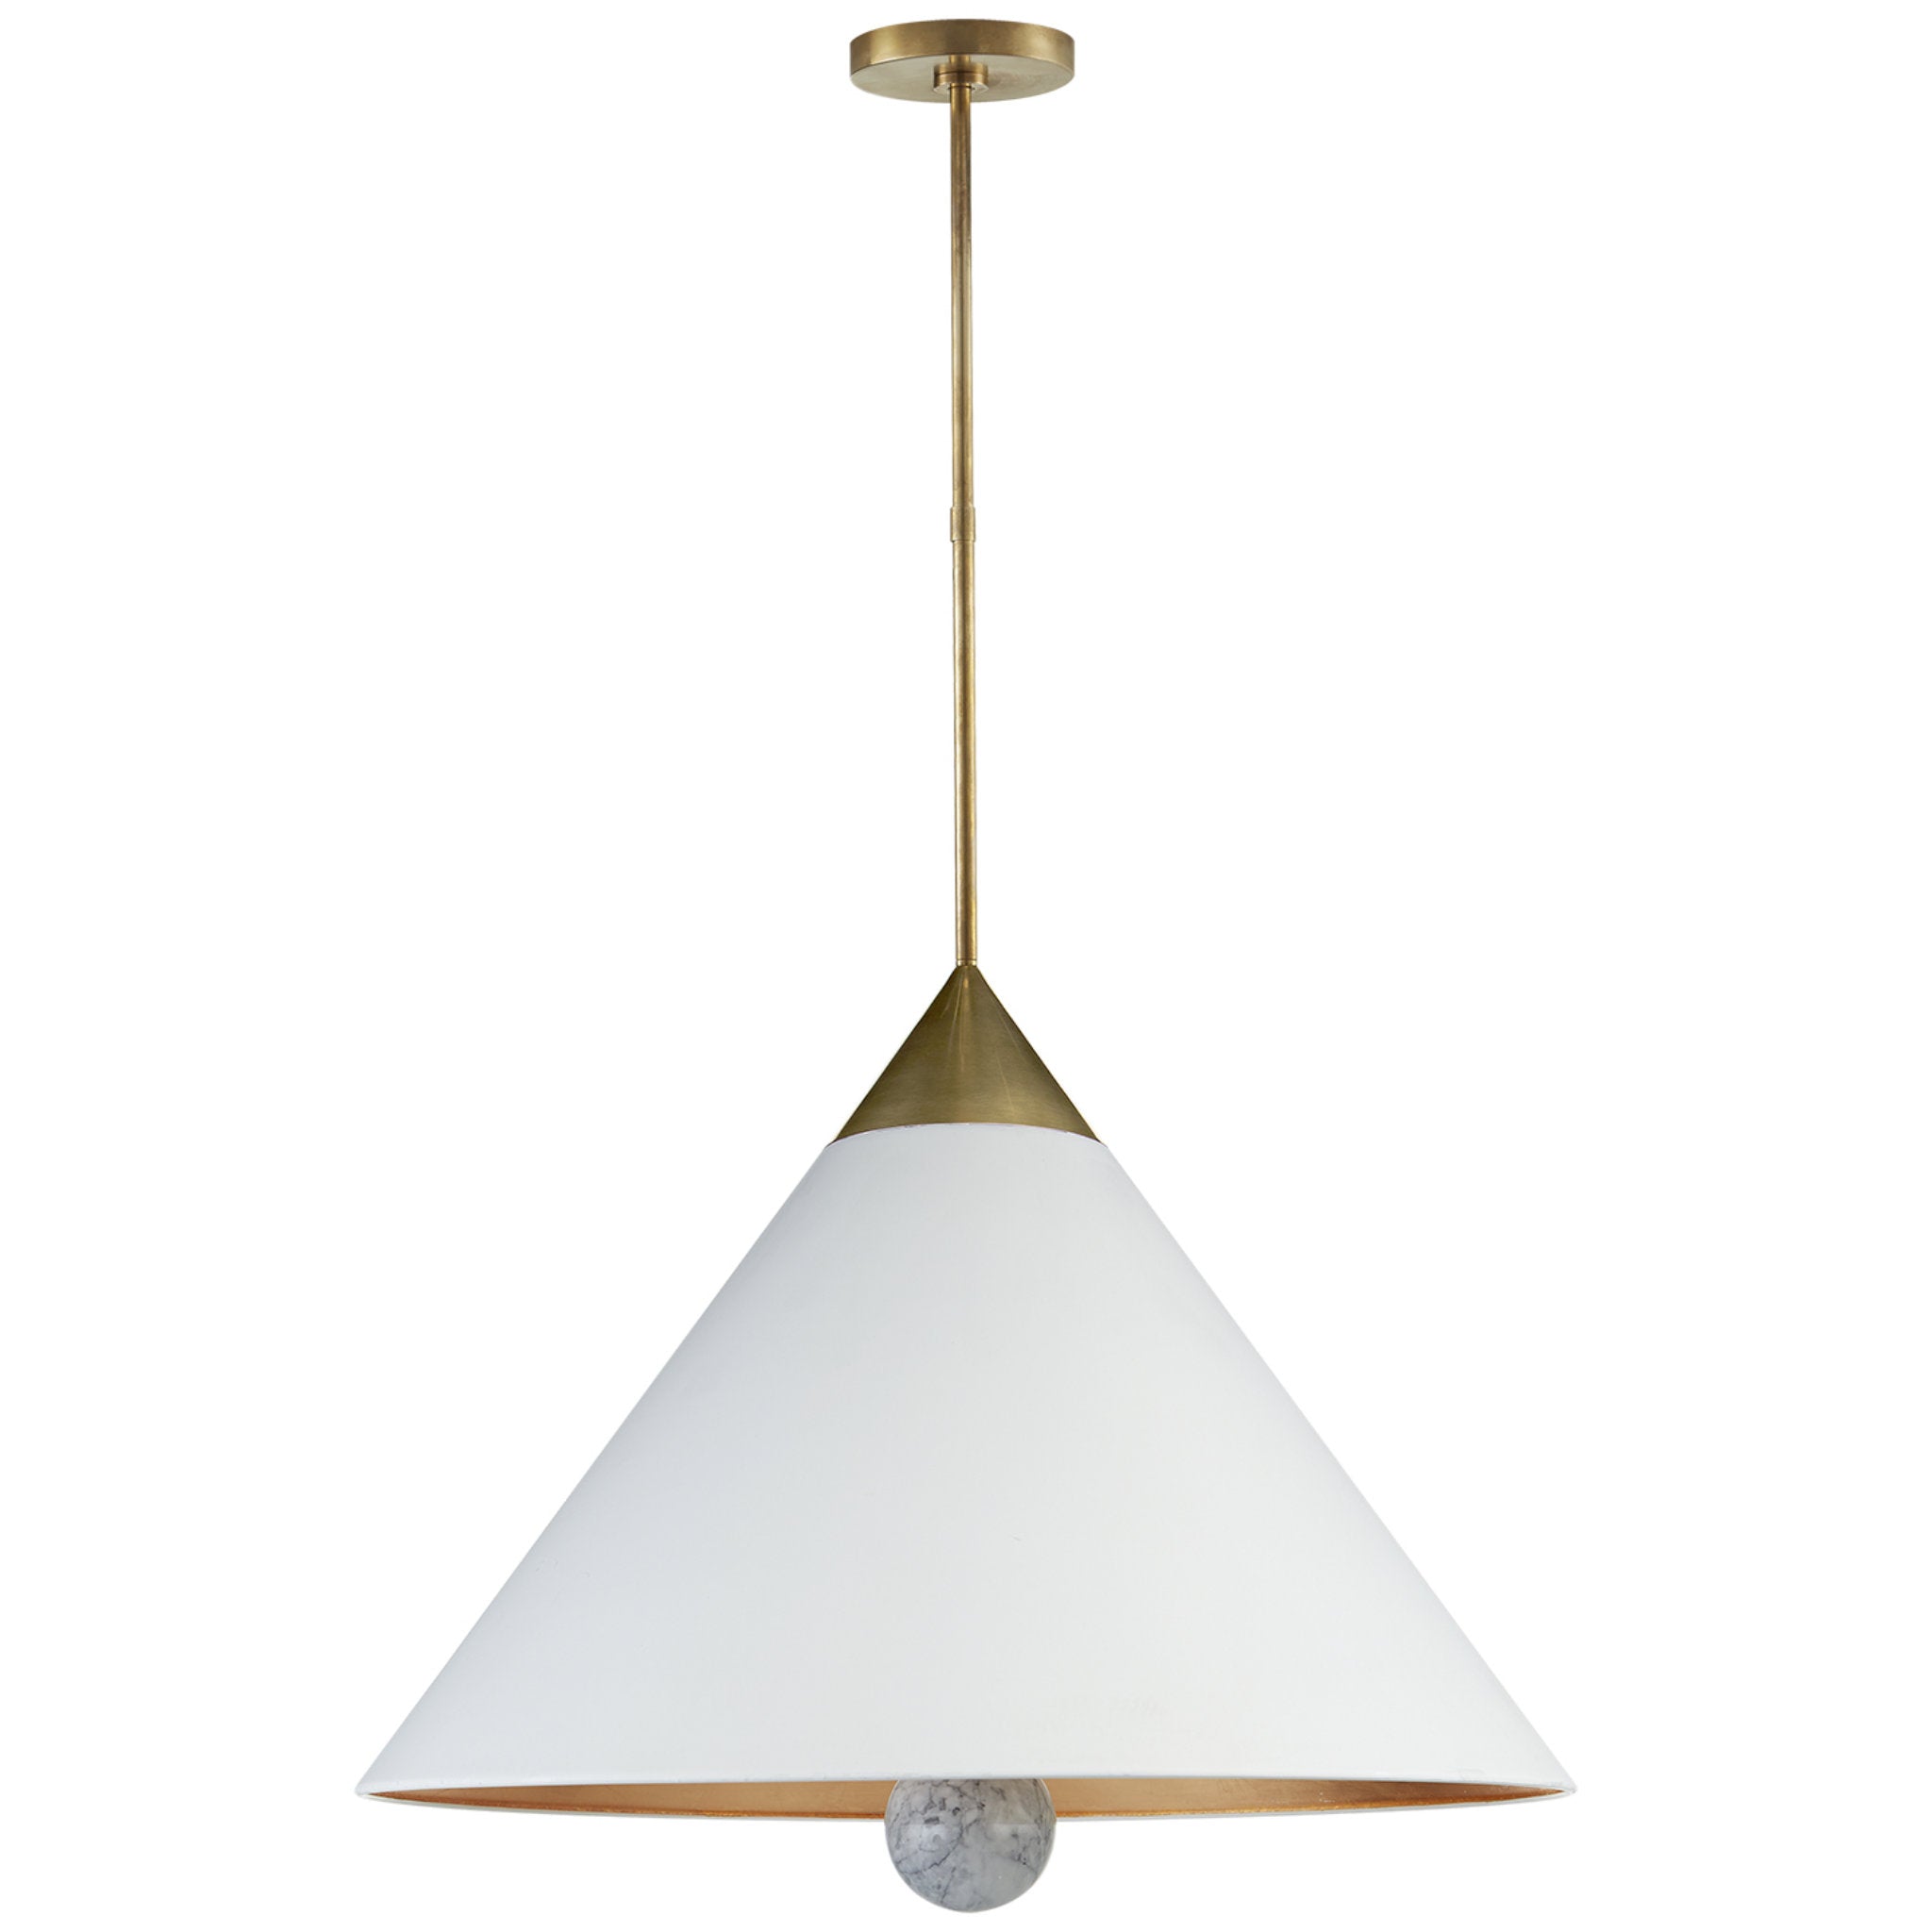 Kelly Wearstler Cleo Large Pendant in Antique-Burnished Brass and White Marble with White Shade with Gild Interior